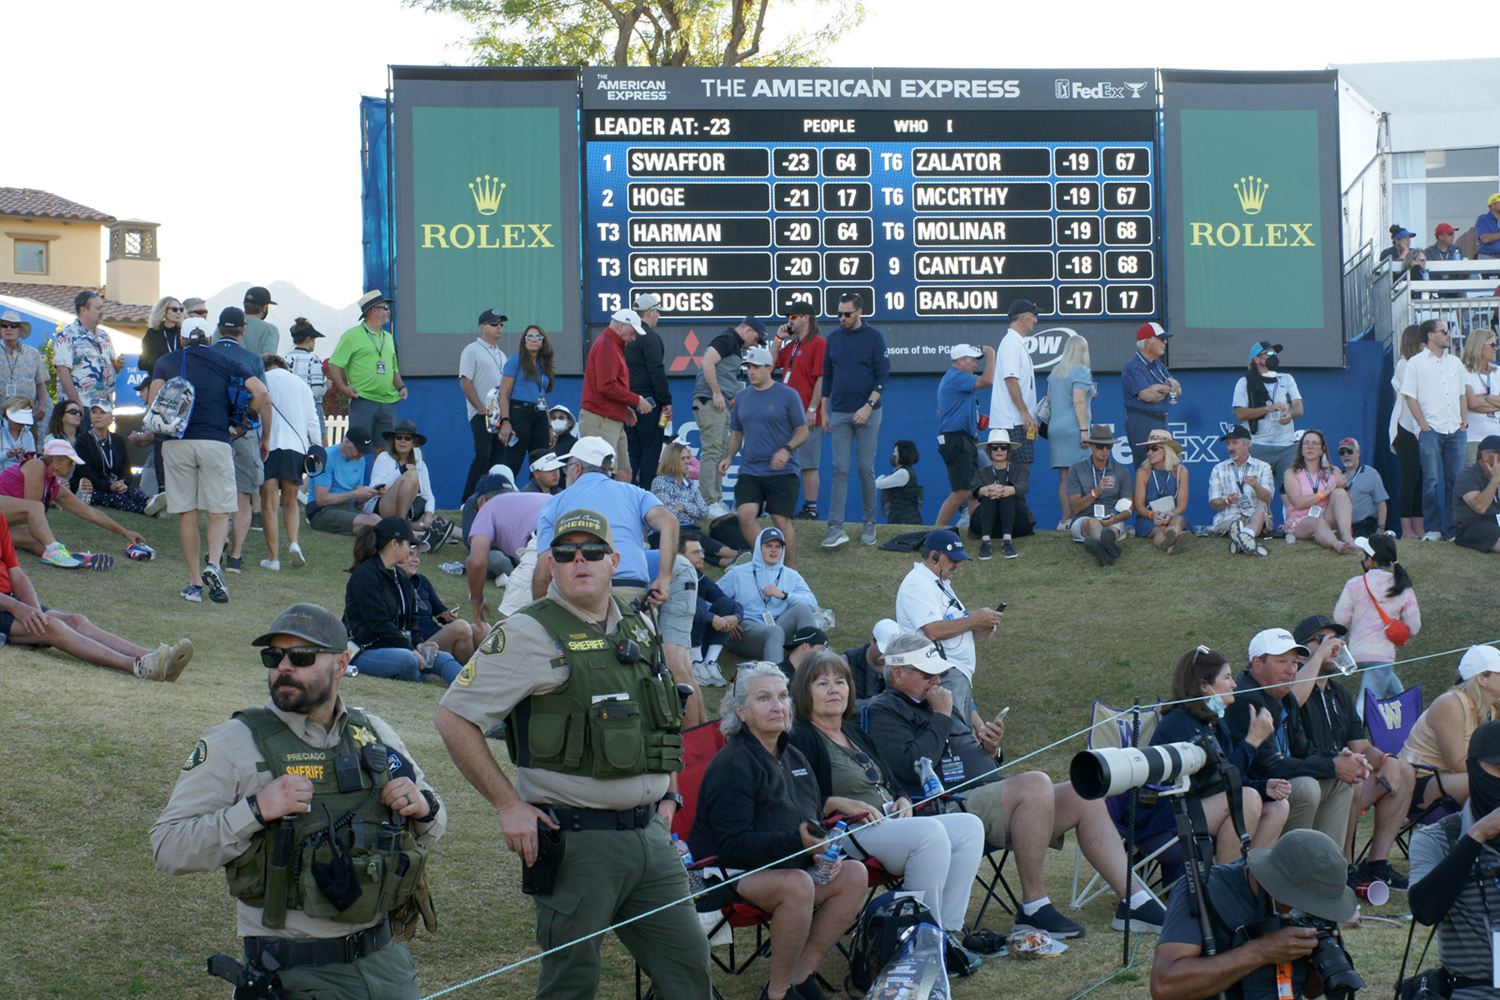 The American Express Golf Tournament